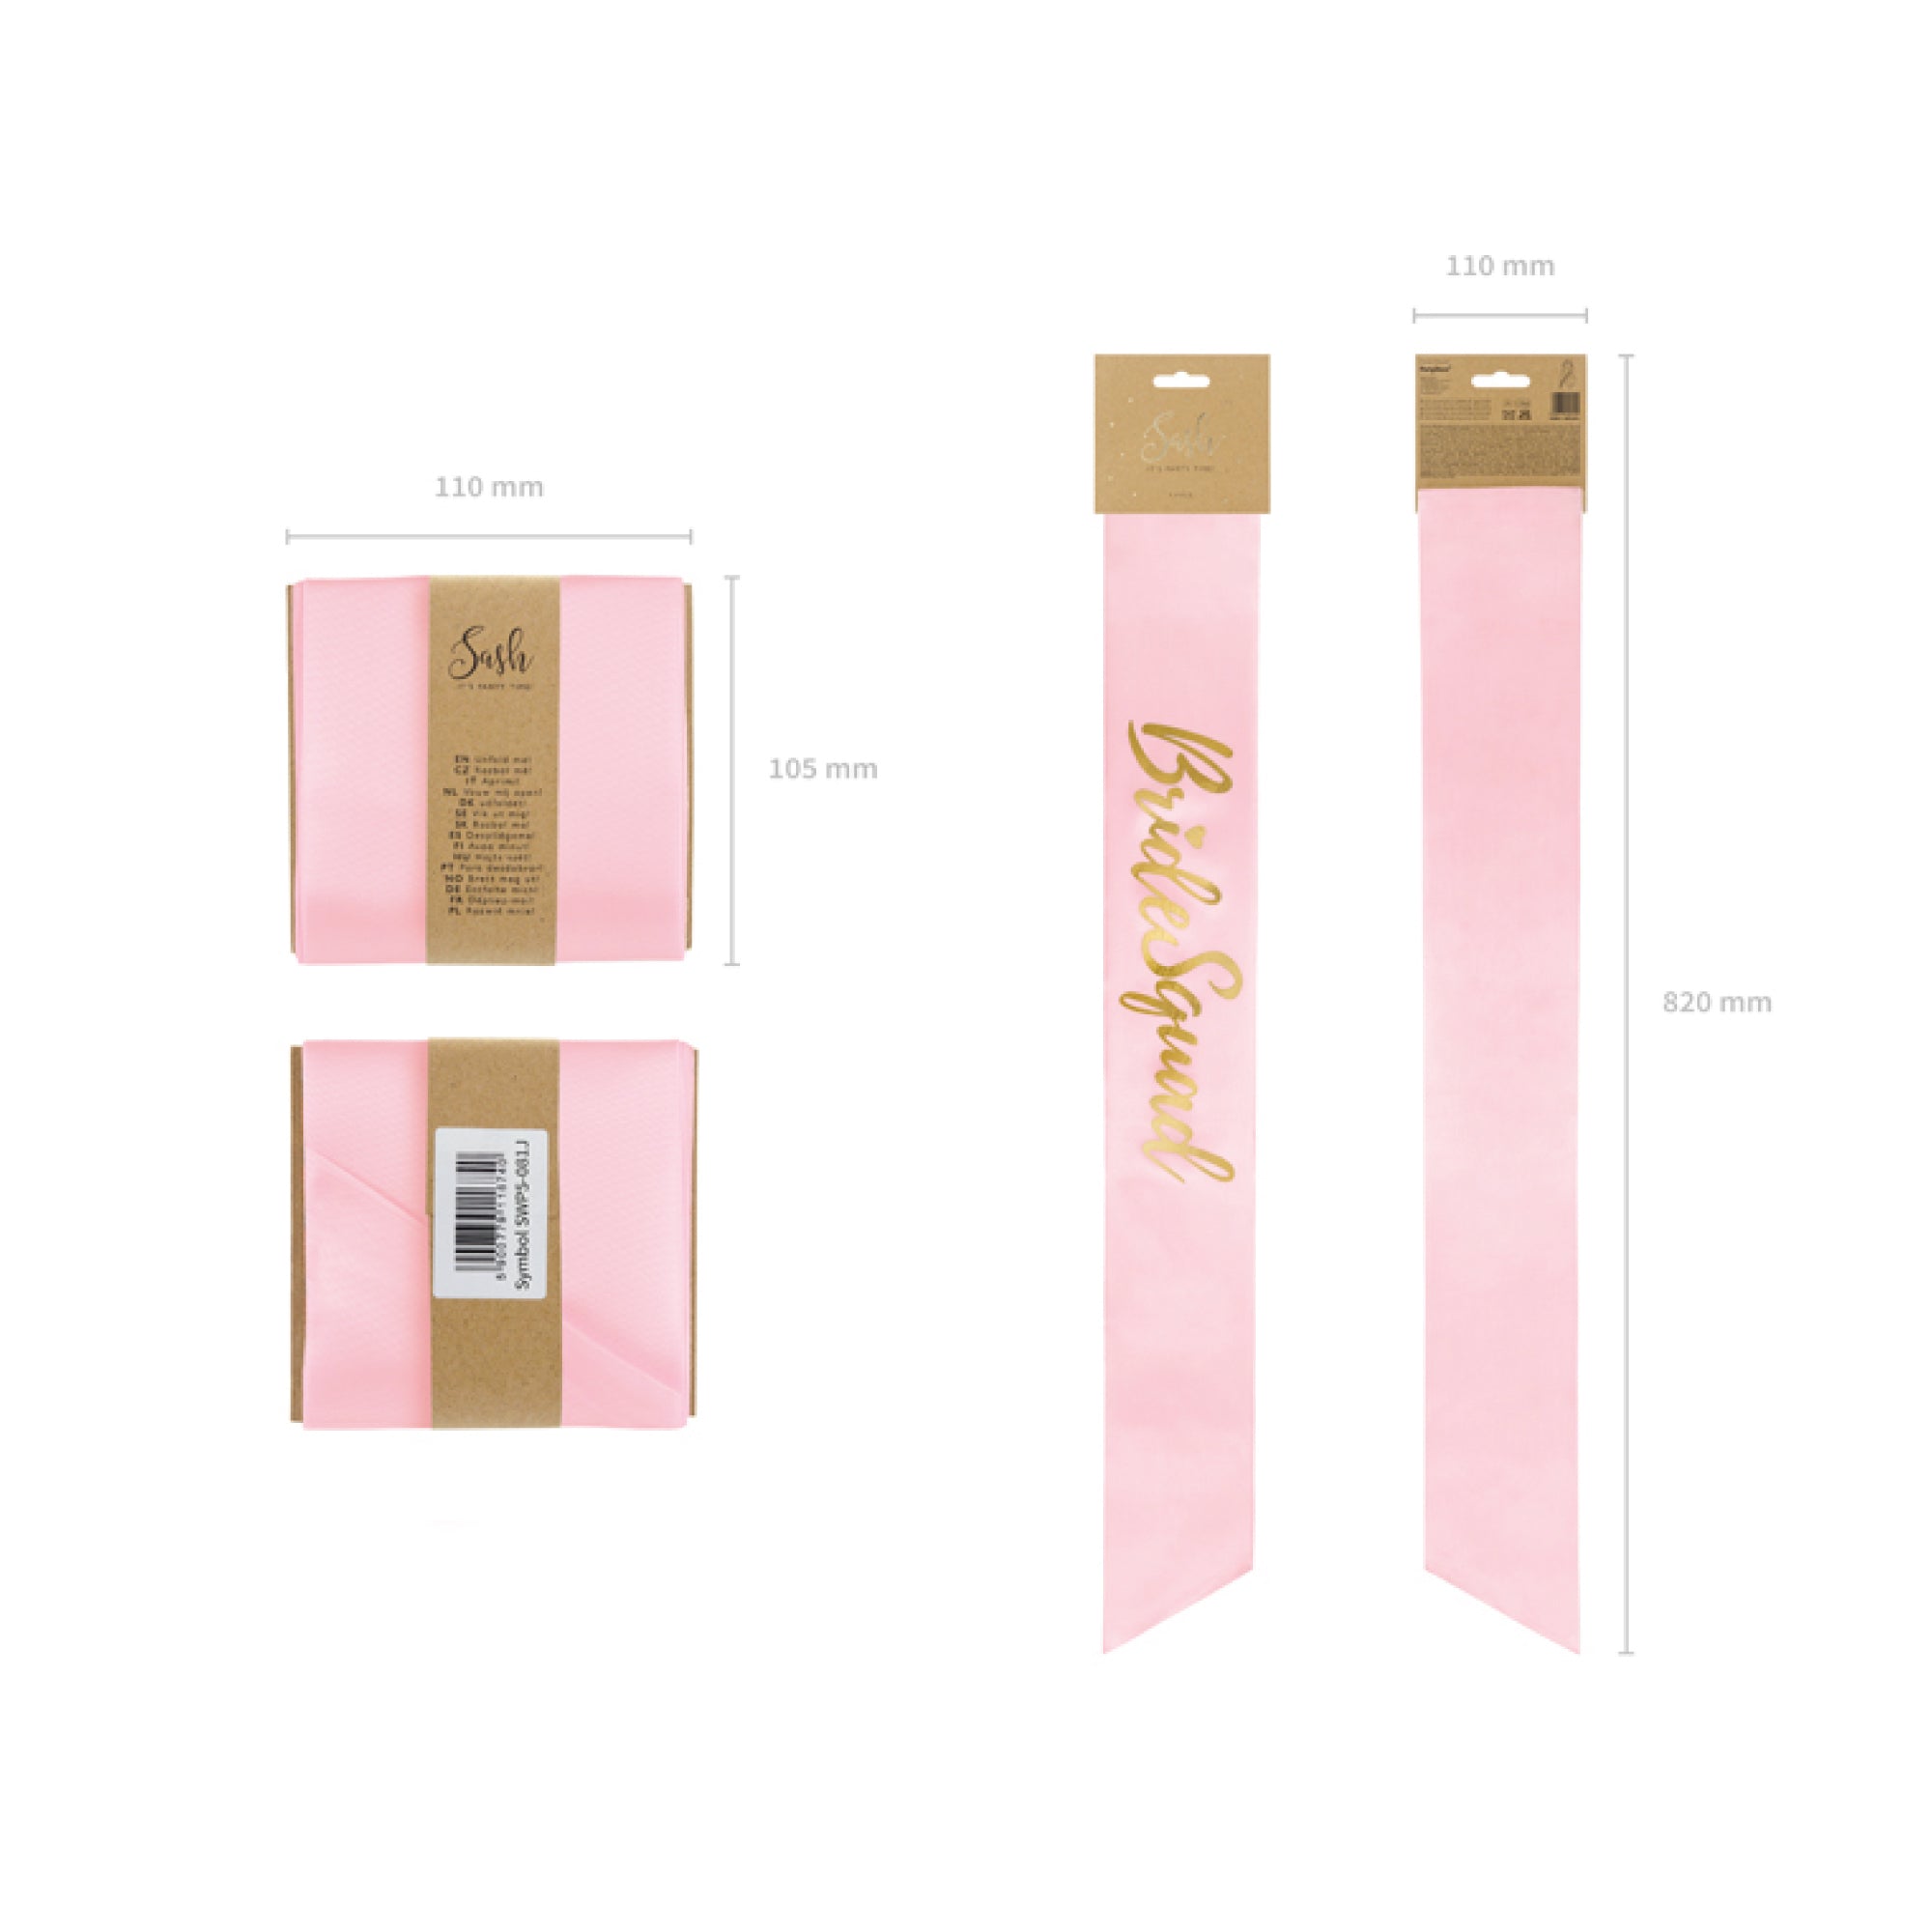 Pink & Gold Bride Squad Sash | The Party Darling